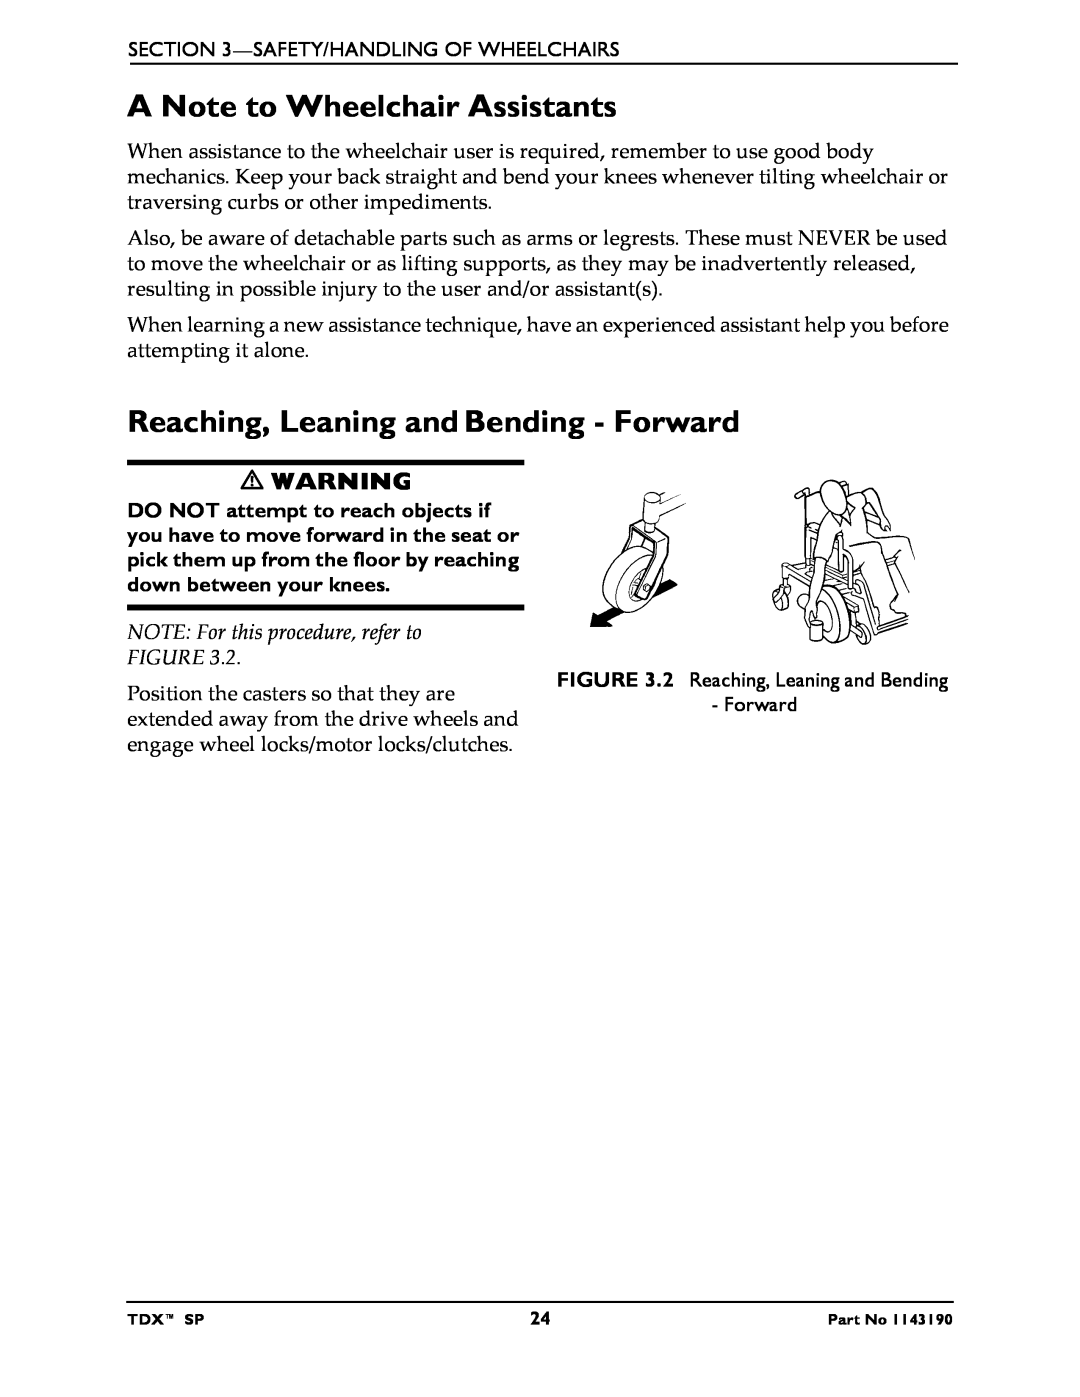 Invacare SP A Note to Wheelchair Assistants, Reaching, Leaning and Bending - Forward, NOTE For this procedure, refer to 